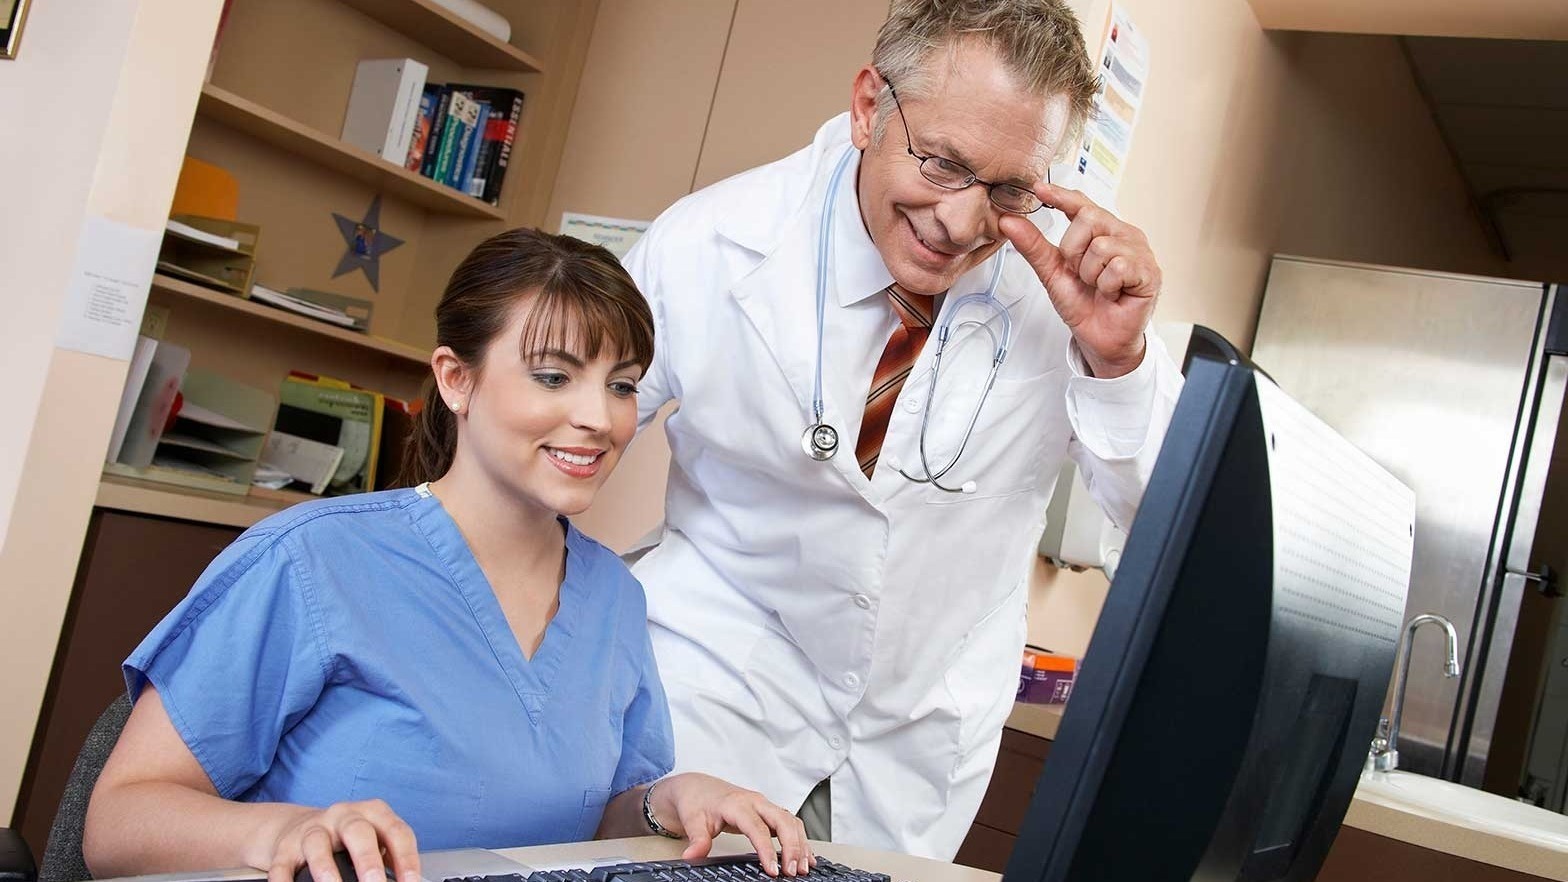 Doctor standing and nurse sitting smiling at computer.